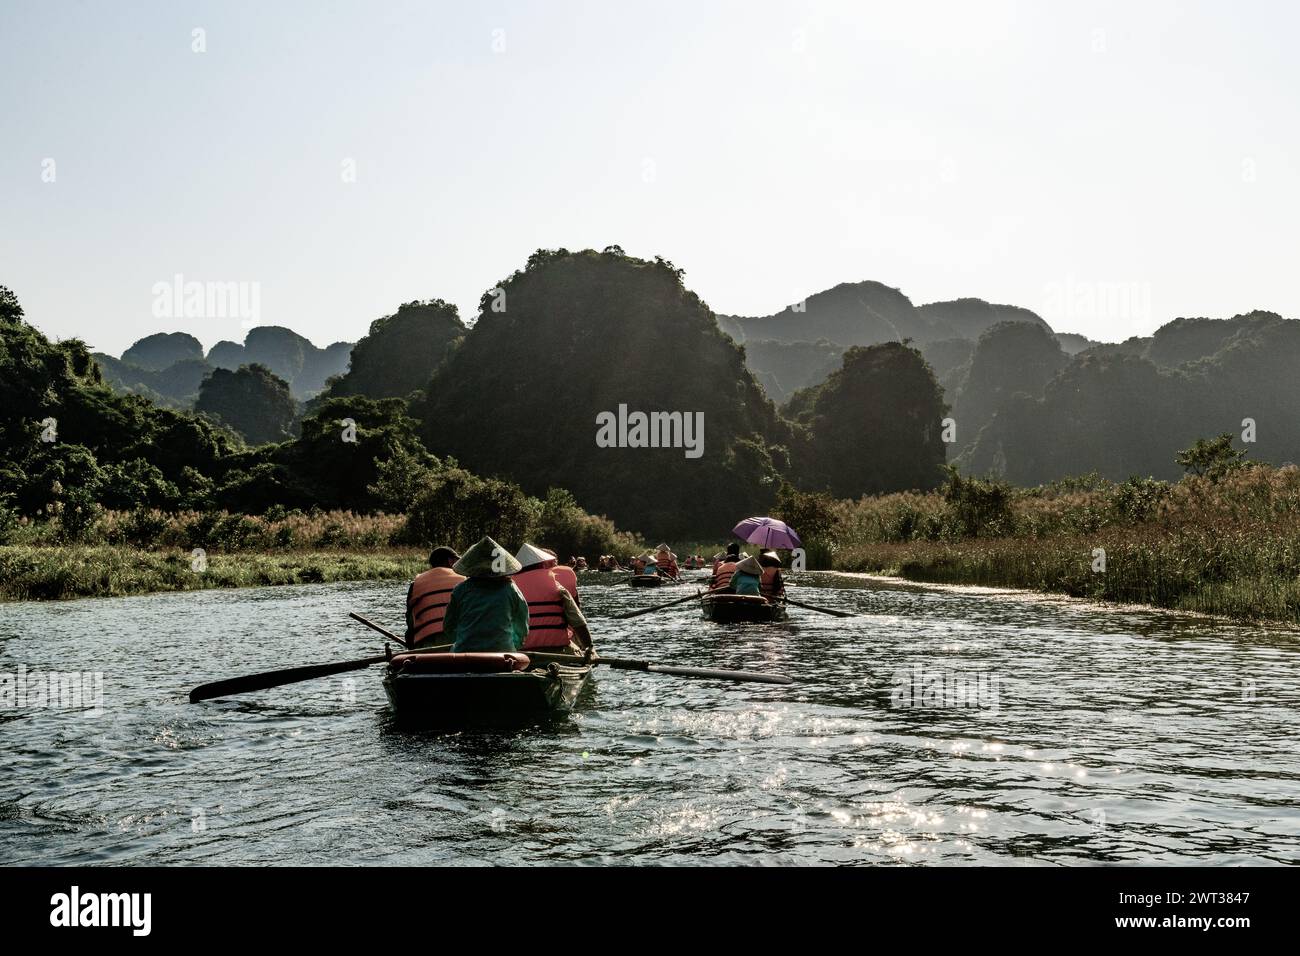 Small rowboats filled with tourists float down a river amid limestone mountains in Tam Coc, Ninh Binh province, northern Vietnam. Stock Photo